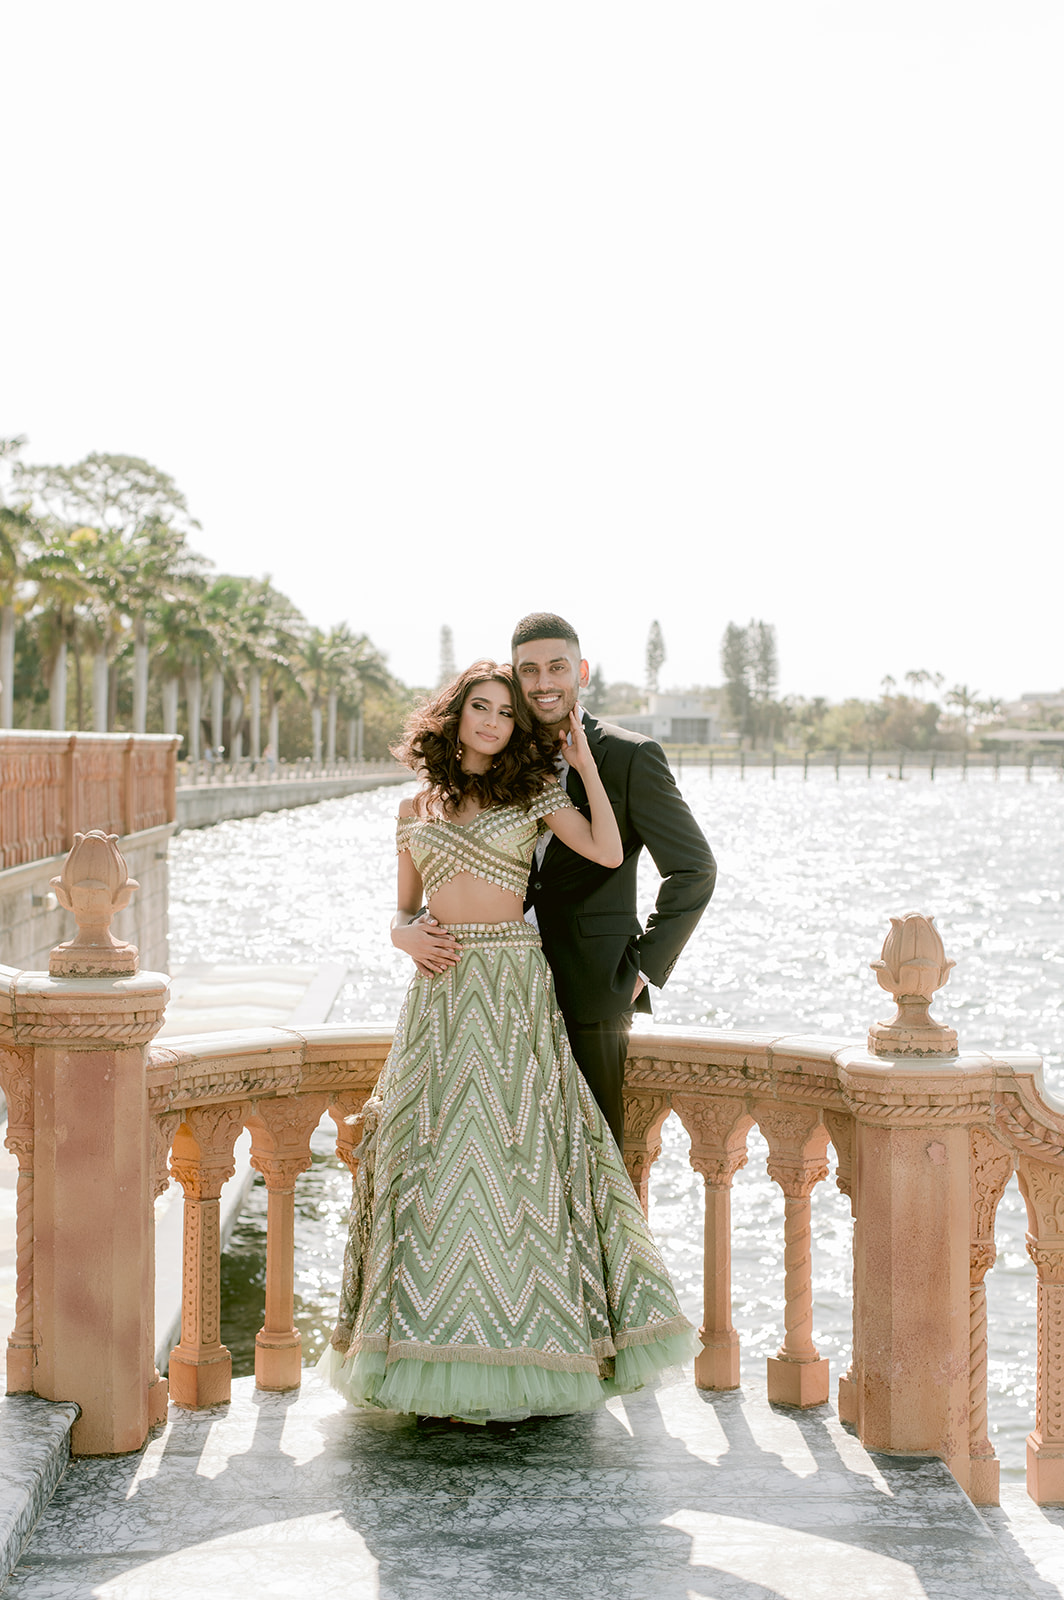 "Indian couple in traditional attire showcases their love and beauty at the Ringling Museum's Ca' d'Zan mansion"
